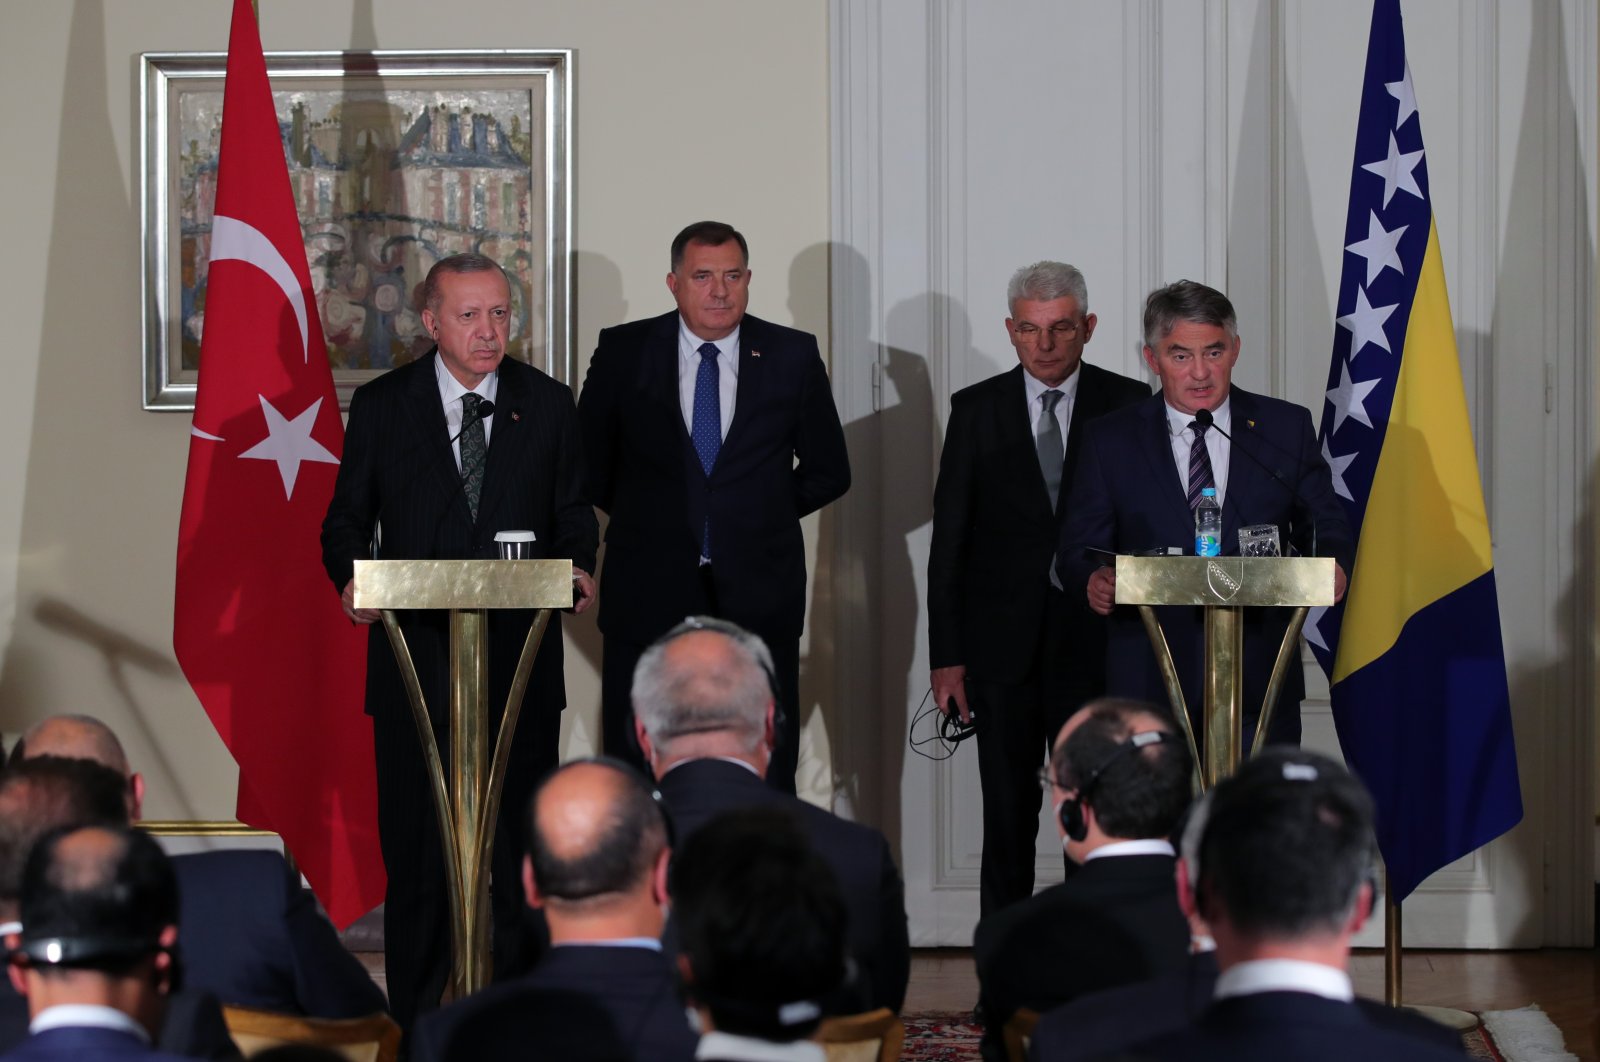 President Recep Tayyip Erdoğan speaks at a news conference held with the members of the Presidential Council at the Presidential Palace of Bosnia-Herzegovina, Aug. 27, 2021. (AA Photo)